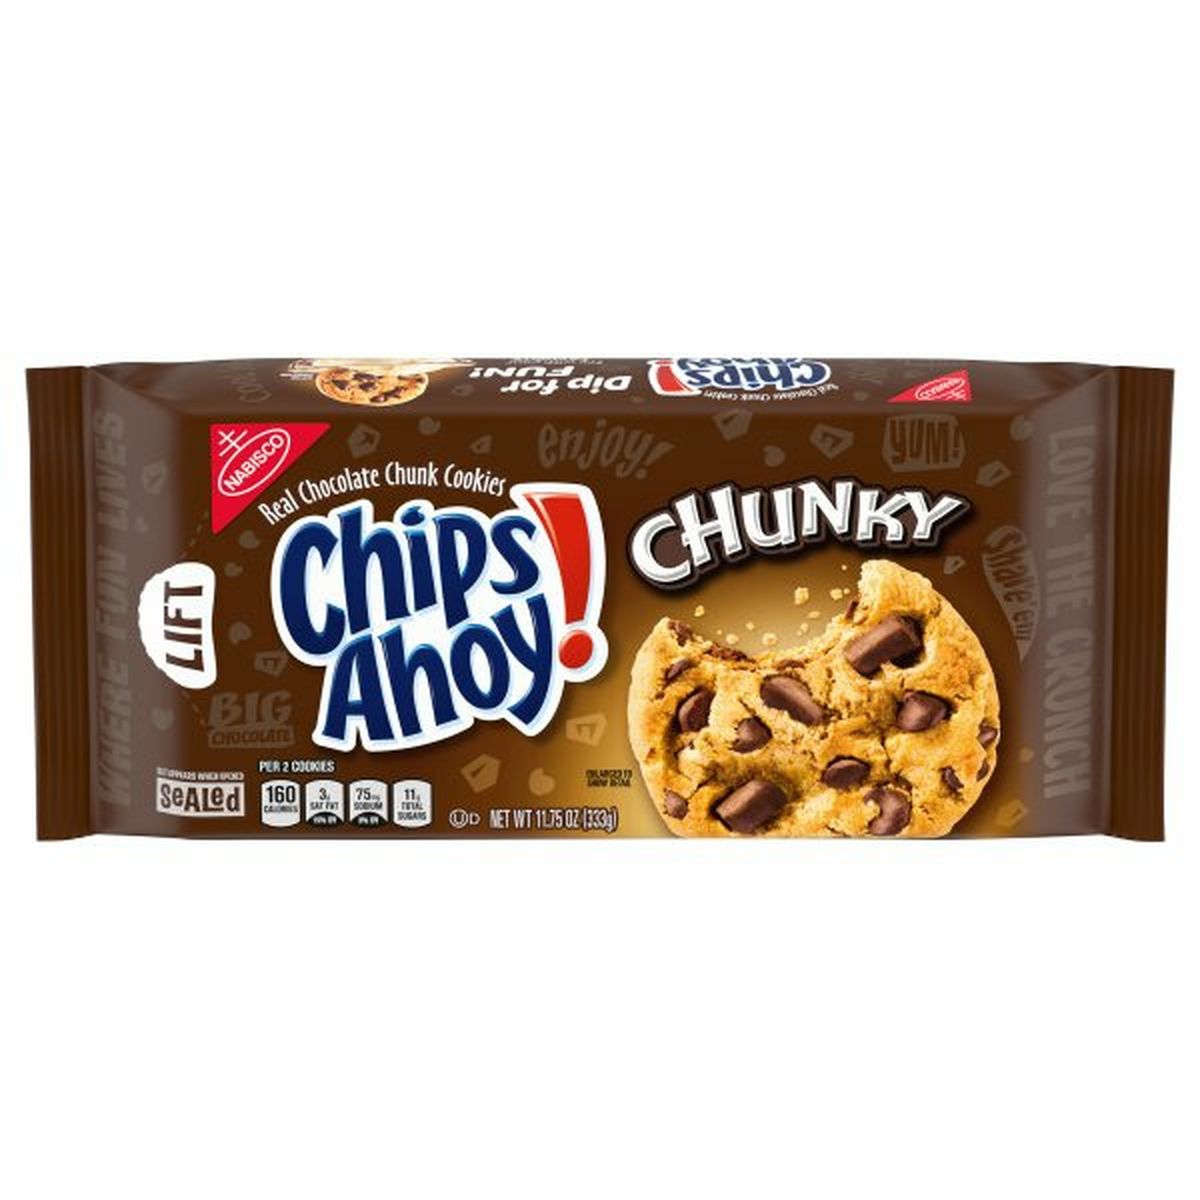 Calories in Chips Ahoy! Cookies, Chunky